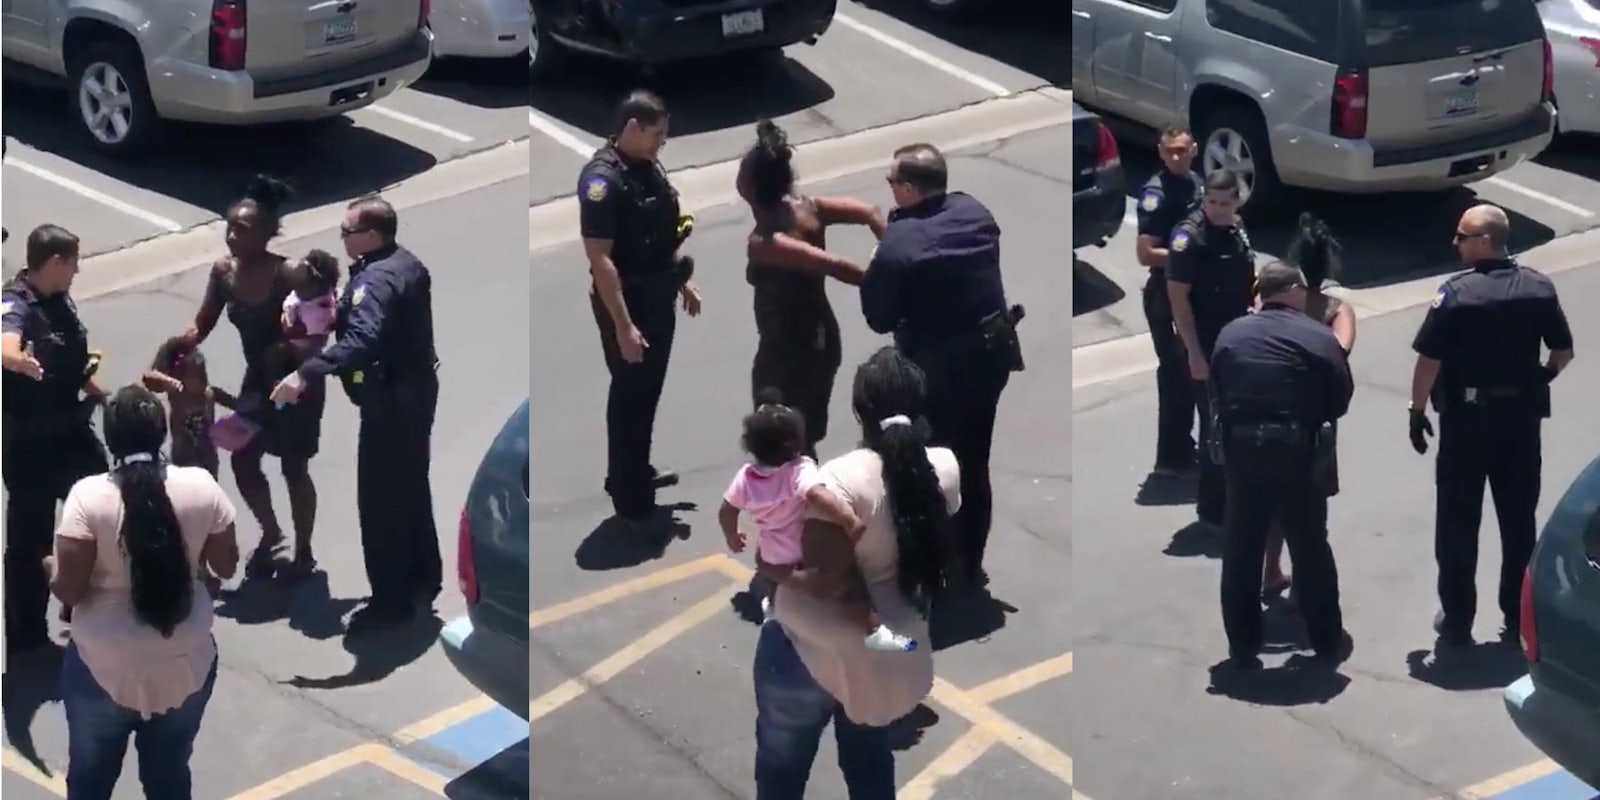 Three snaps from the video show at least four policemen surrounding a five-month pregnant Black mother while arresting her